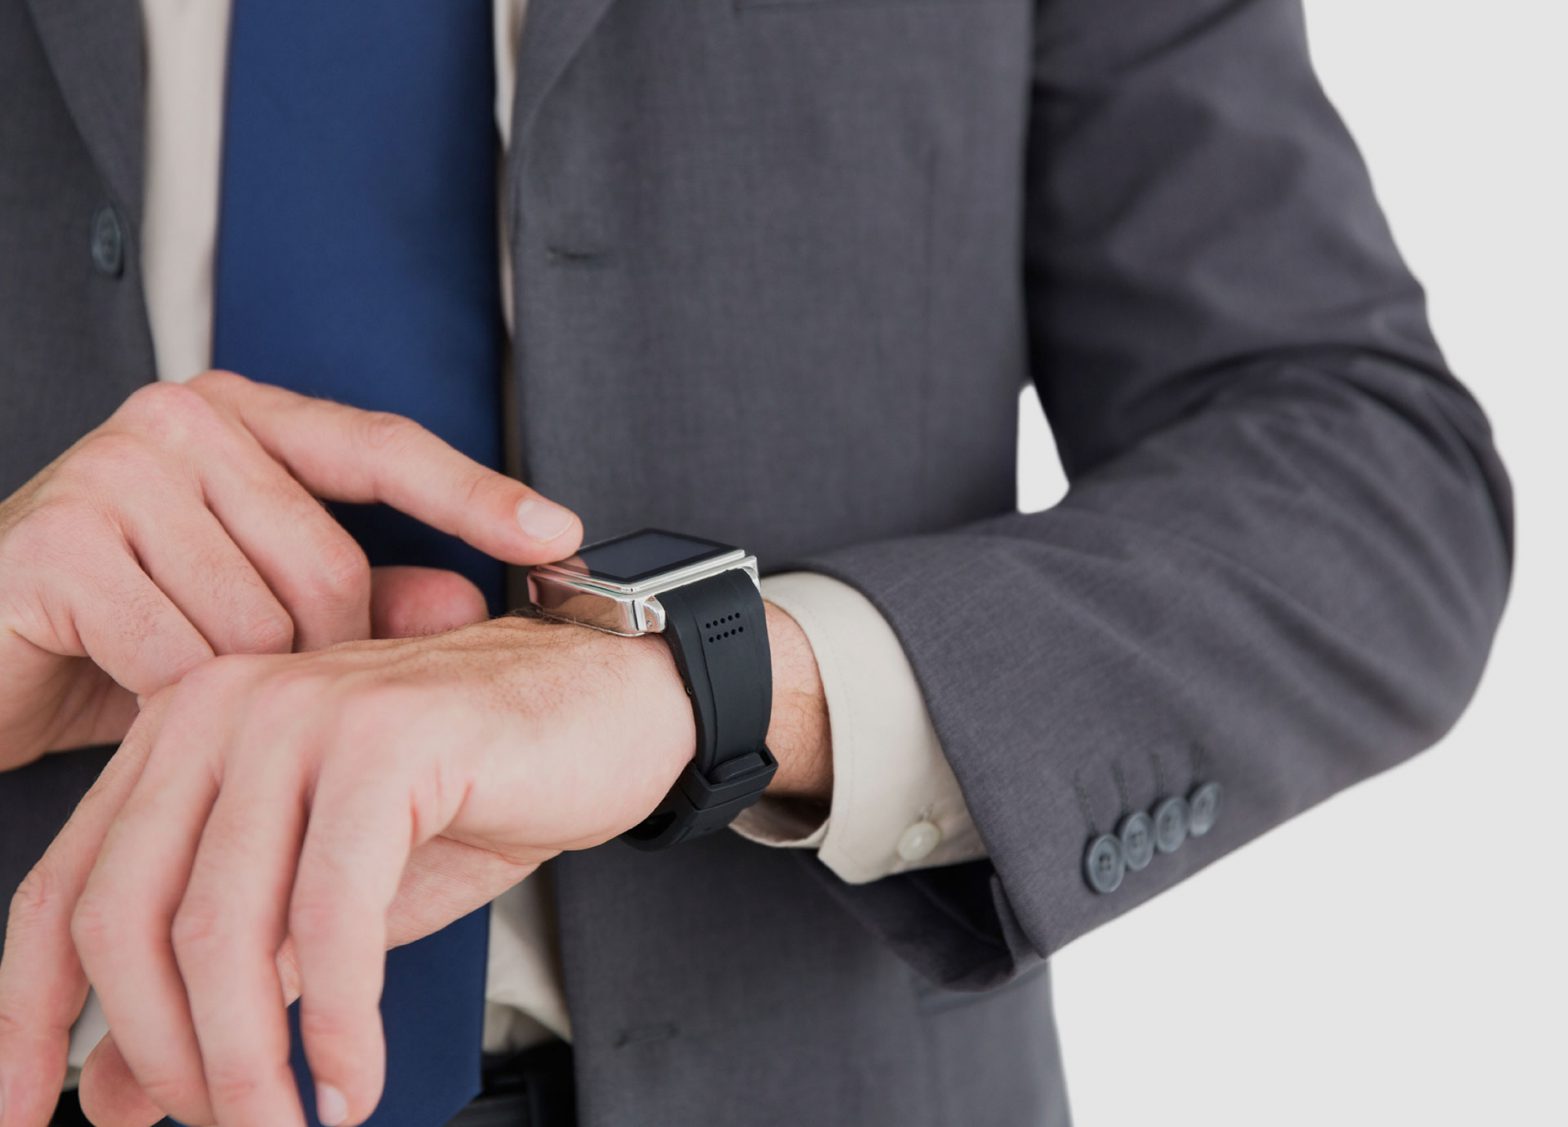 Building Confidence Is Key in Marketing Wearable Technology